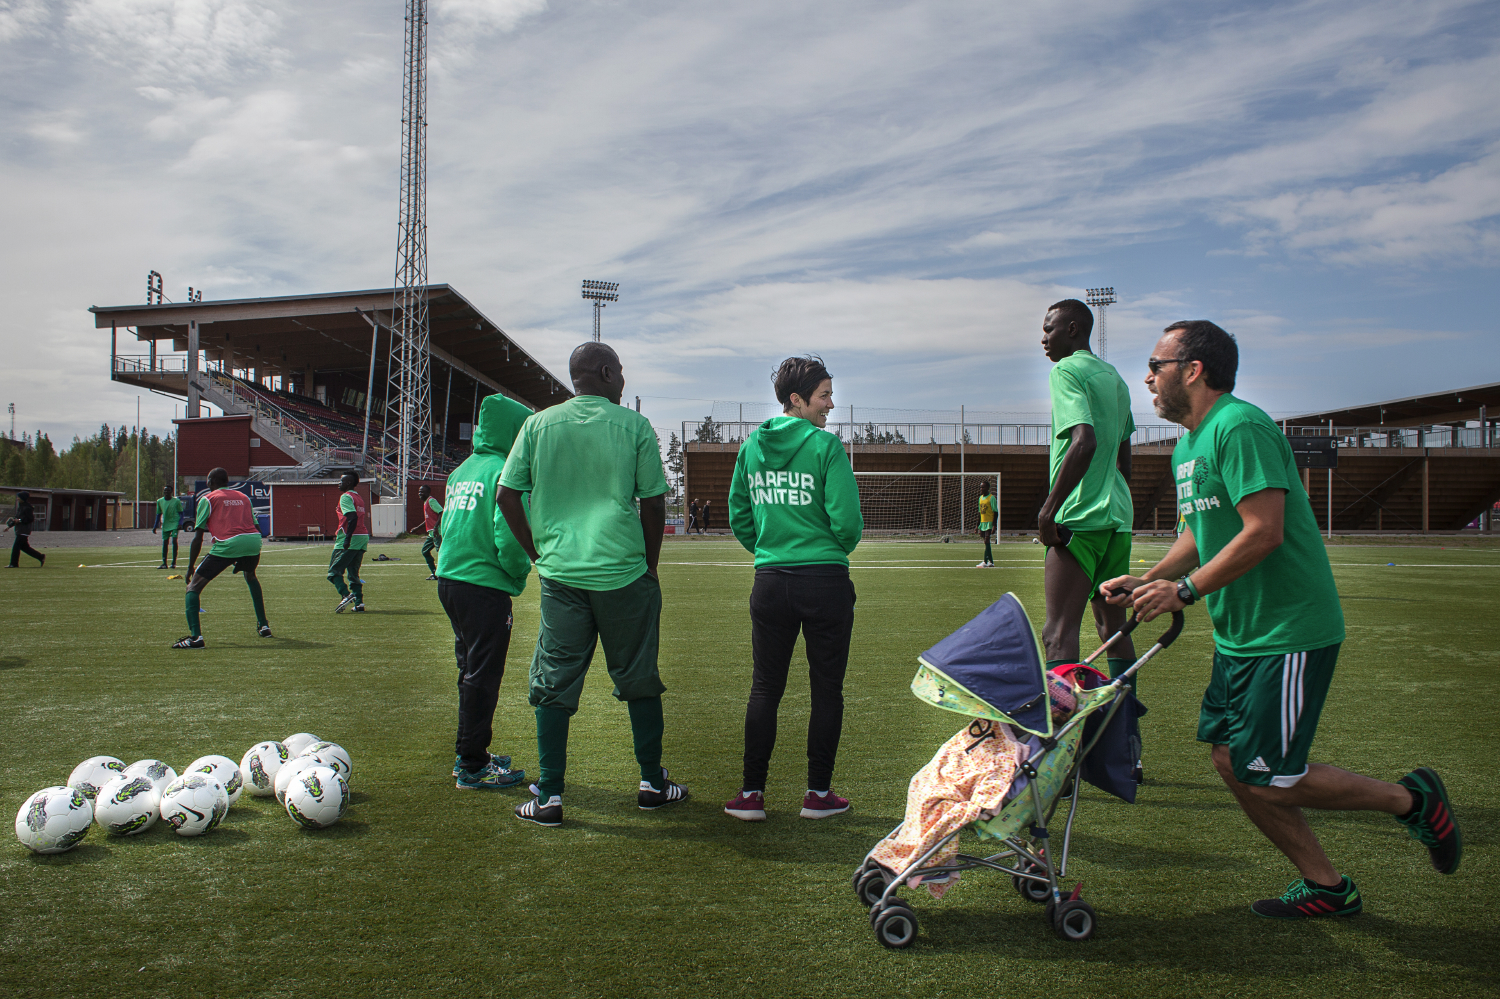  Sweden, Ostersund, June 2014.
Darfur United�s team training for a match in the Ostersund Arena. 